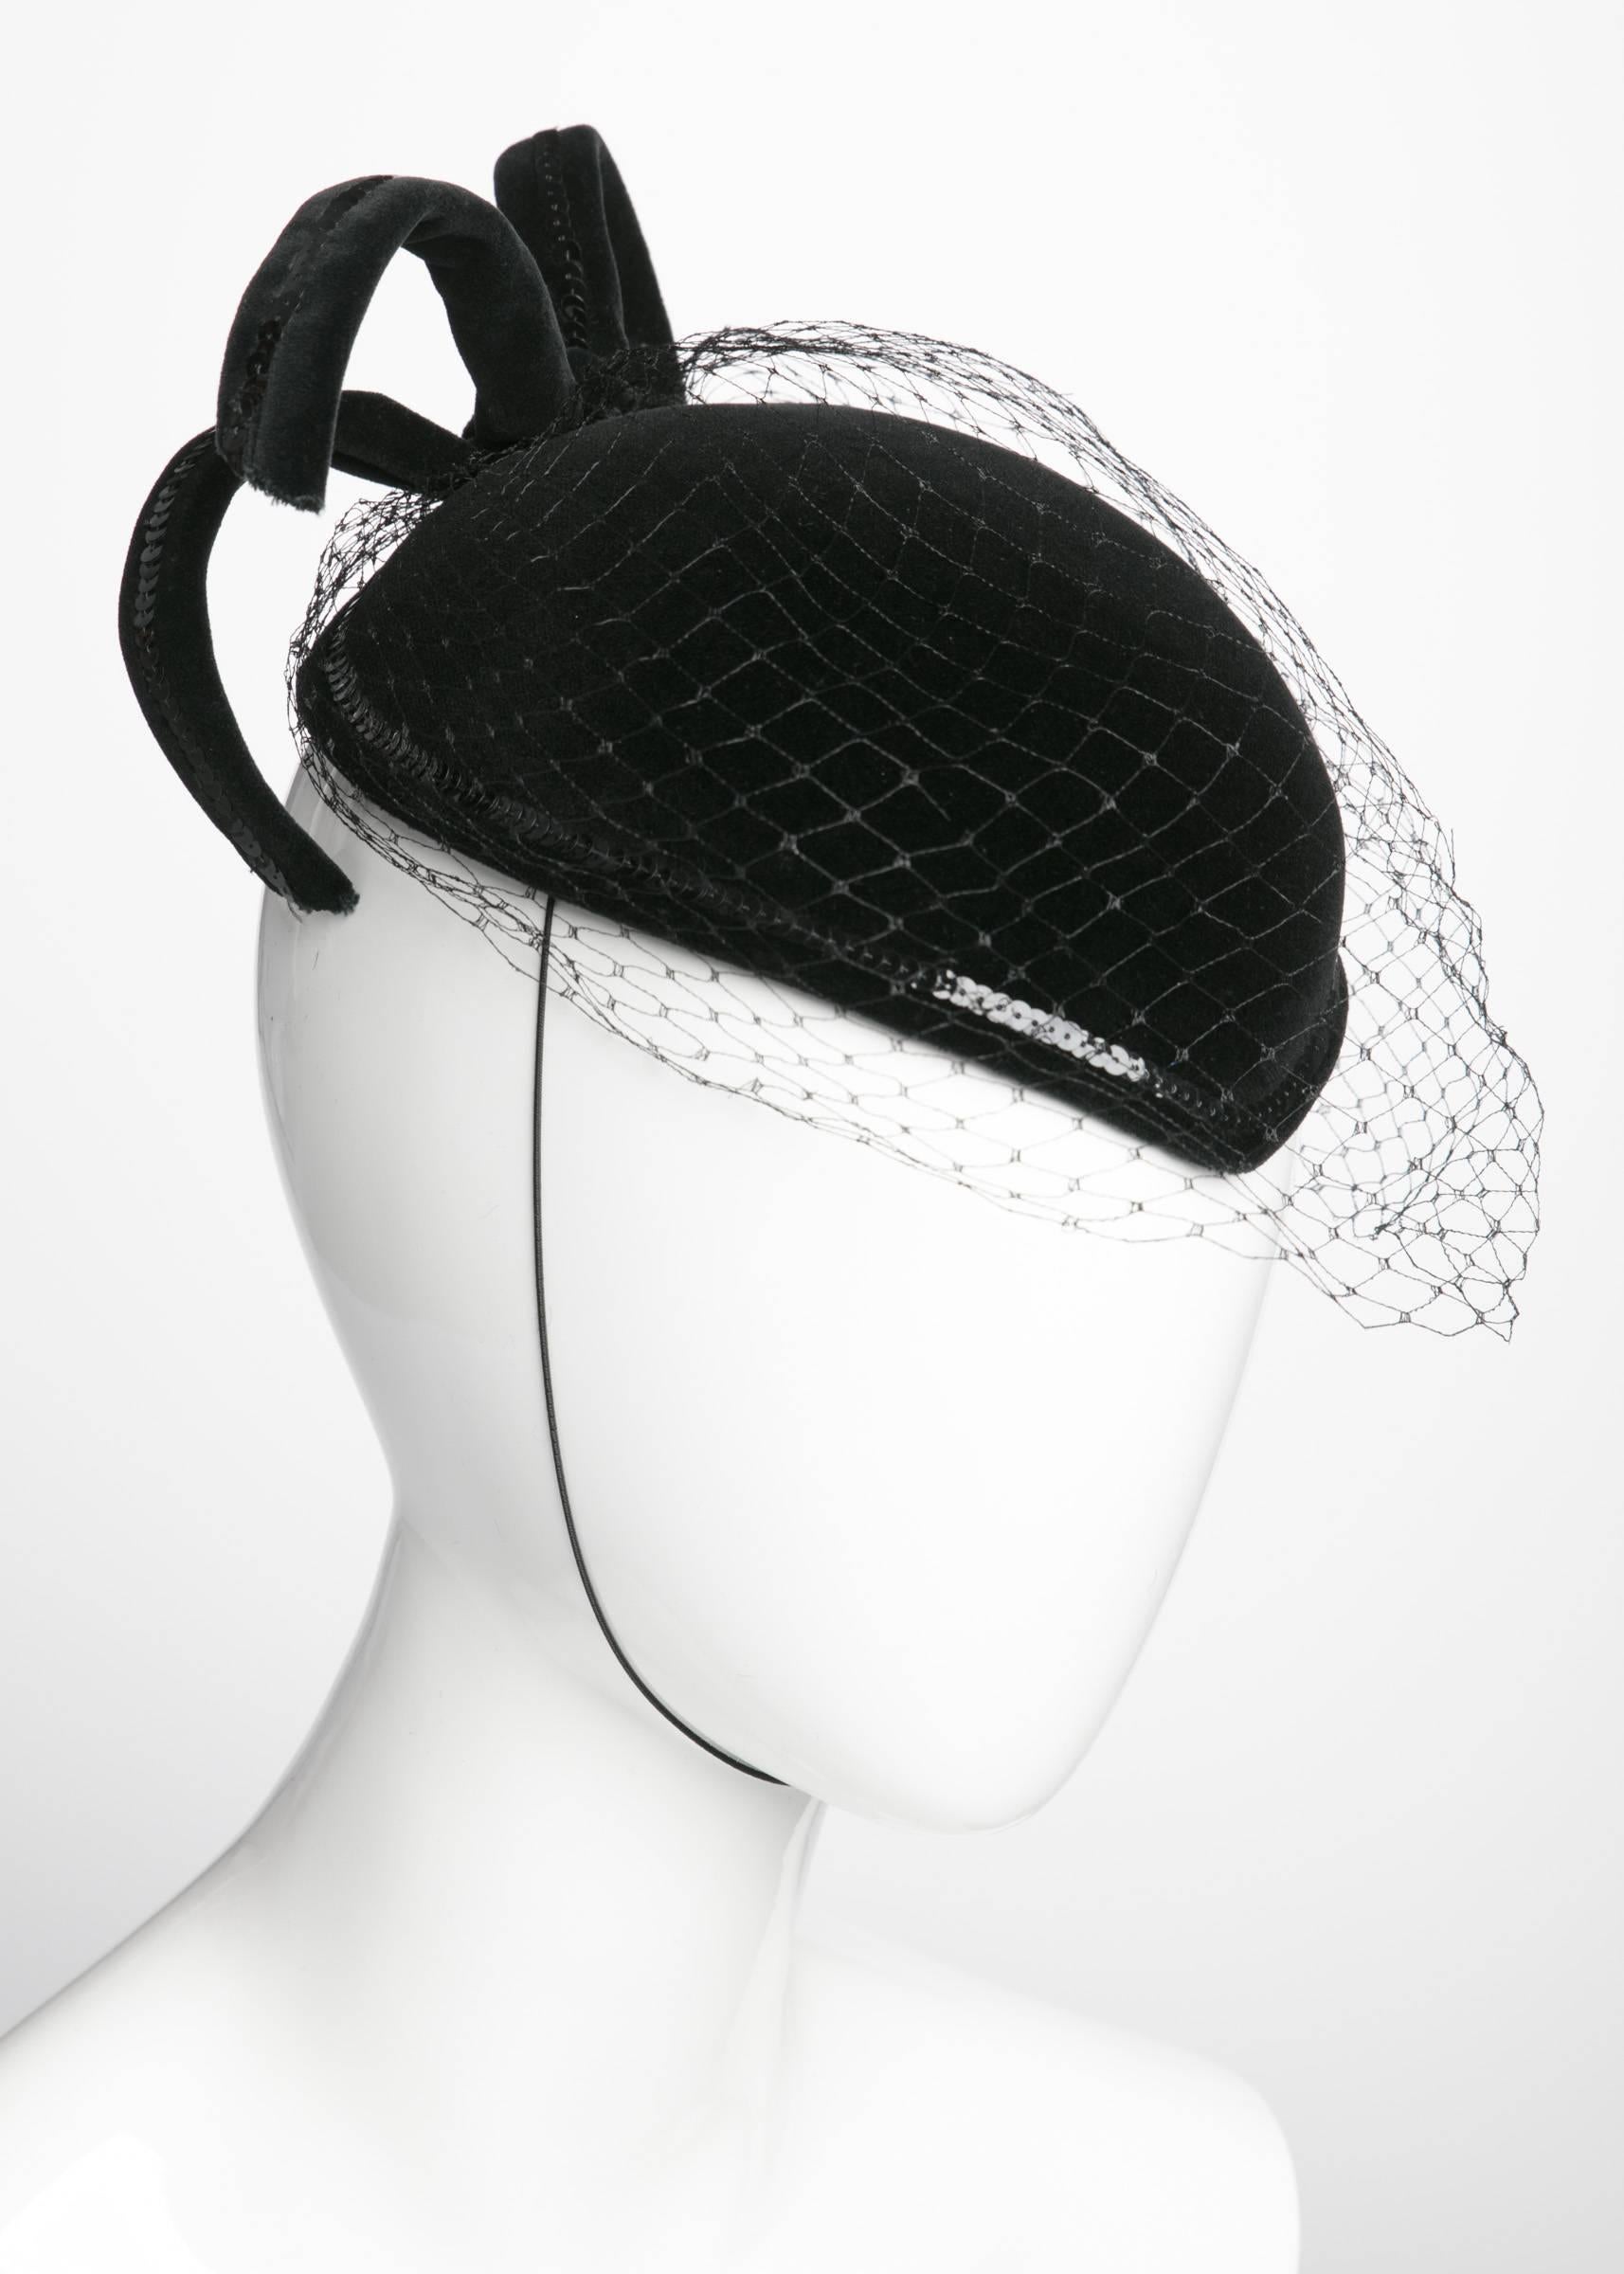 Forget little black dress, this little black hat will make you feel royal. Made by Philip Somerville, a London-based milliner who made innumerable hats for Queen Elizabeth, this black velveteen widows peak hat elegantly dips down over the forehead.